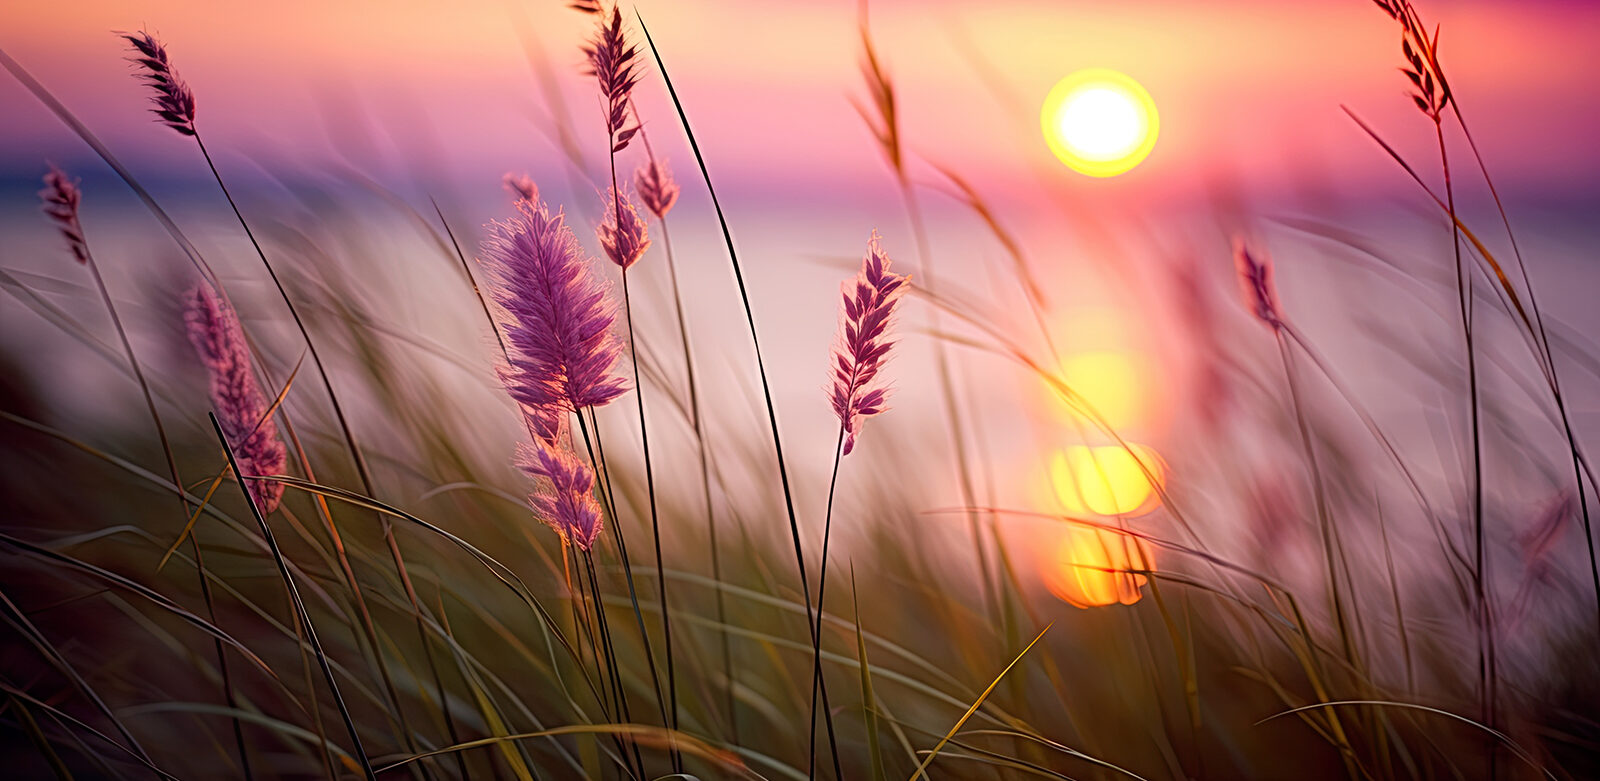 Dry grass and lakeside scene at sunset, blurred outdoor landscap